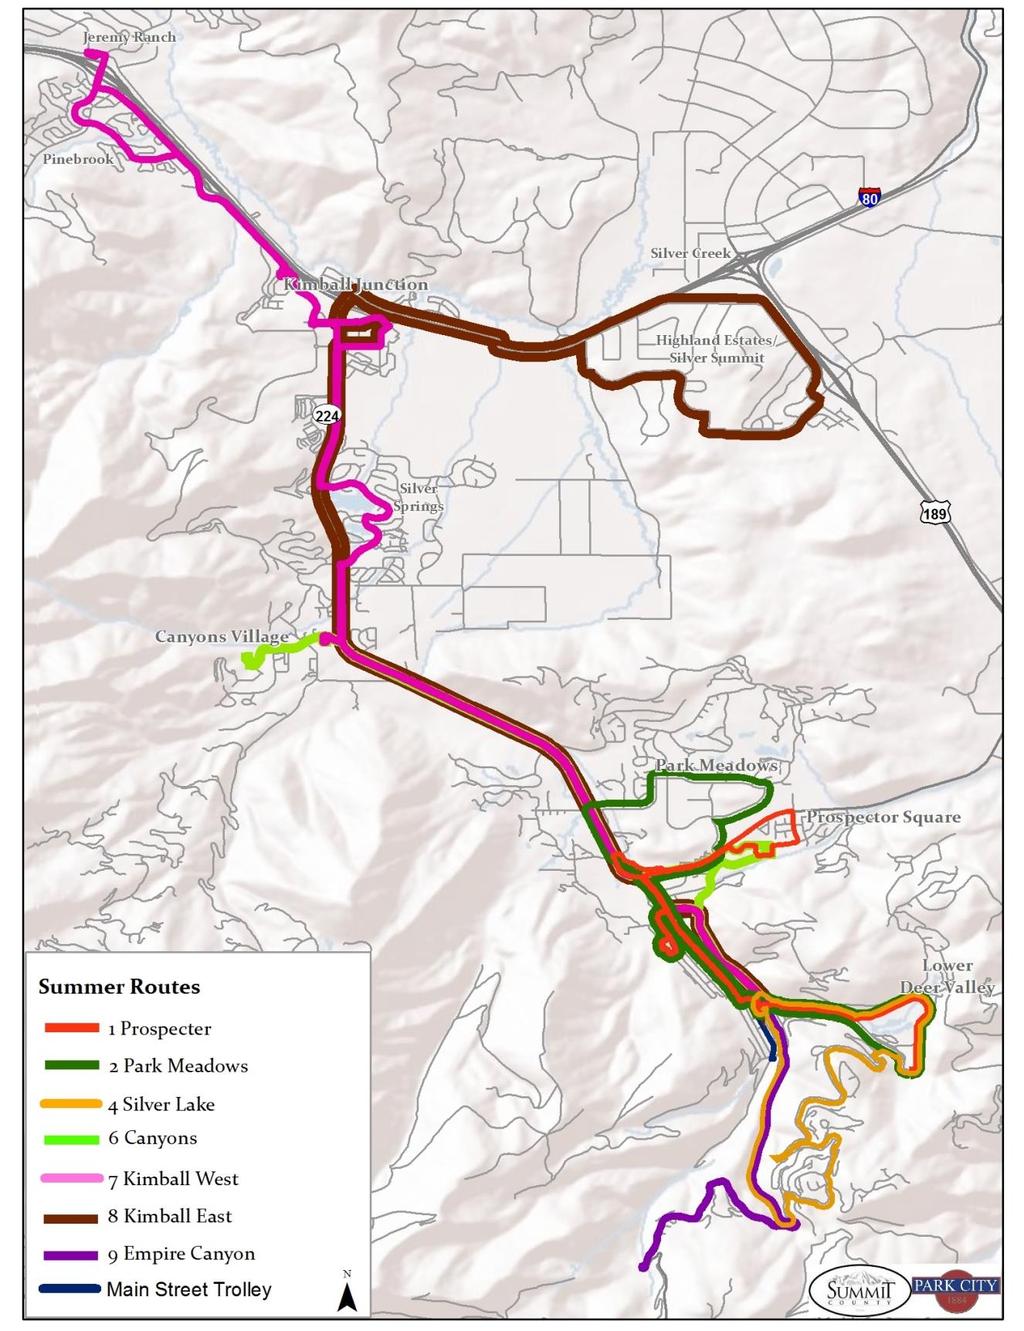 Review of Existing Transit Services Figure 3-2: Park